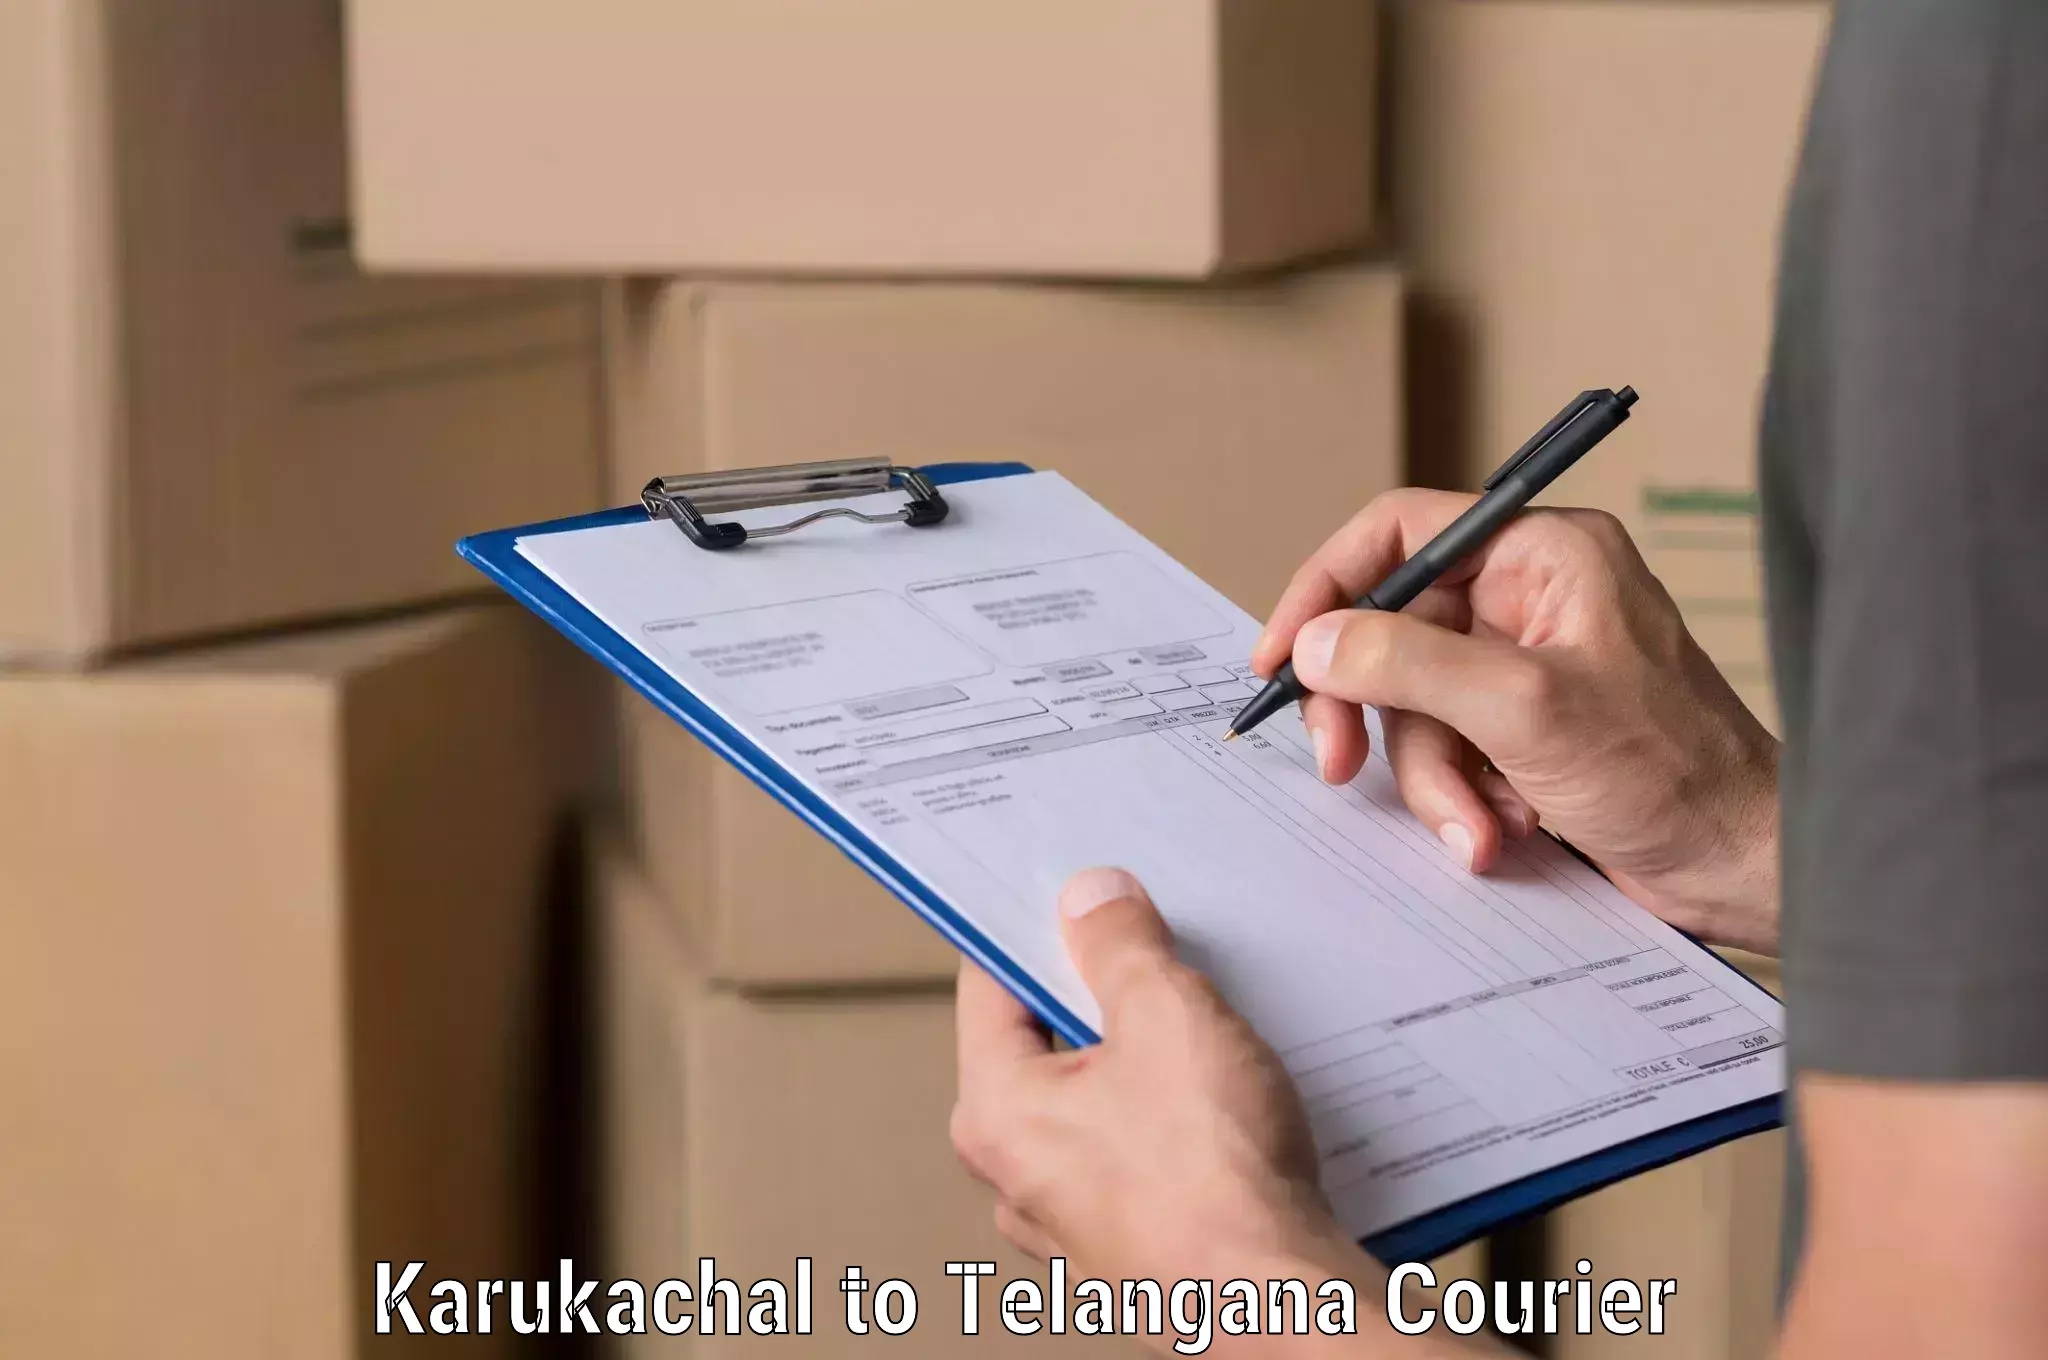 Flexible delivery schedules in Karukachal to Kamalapur